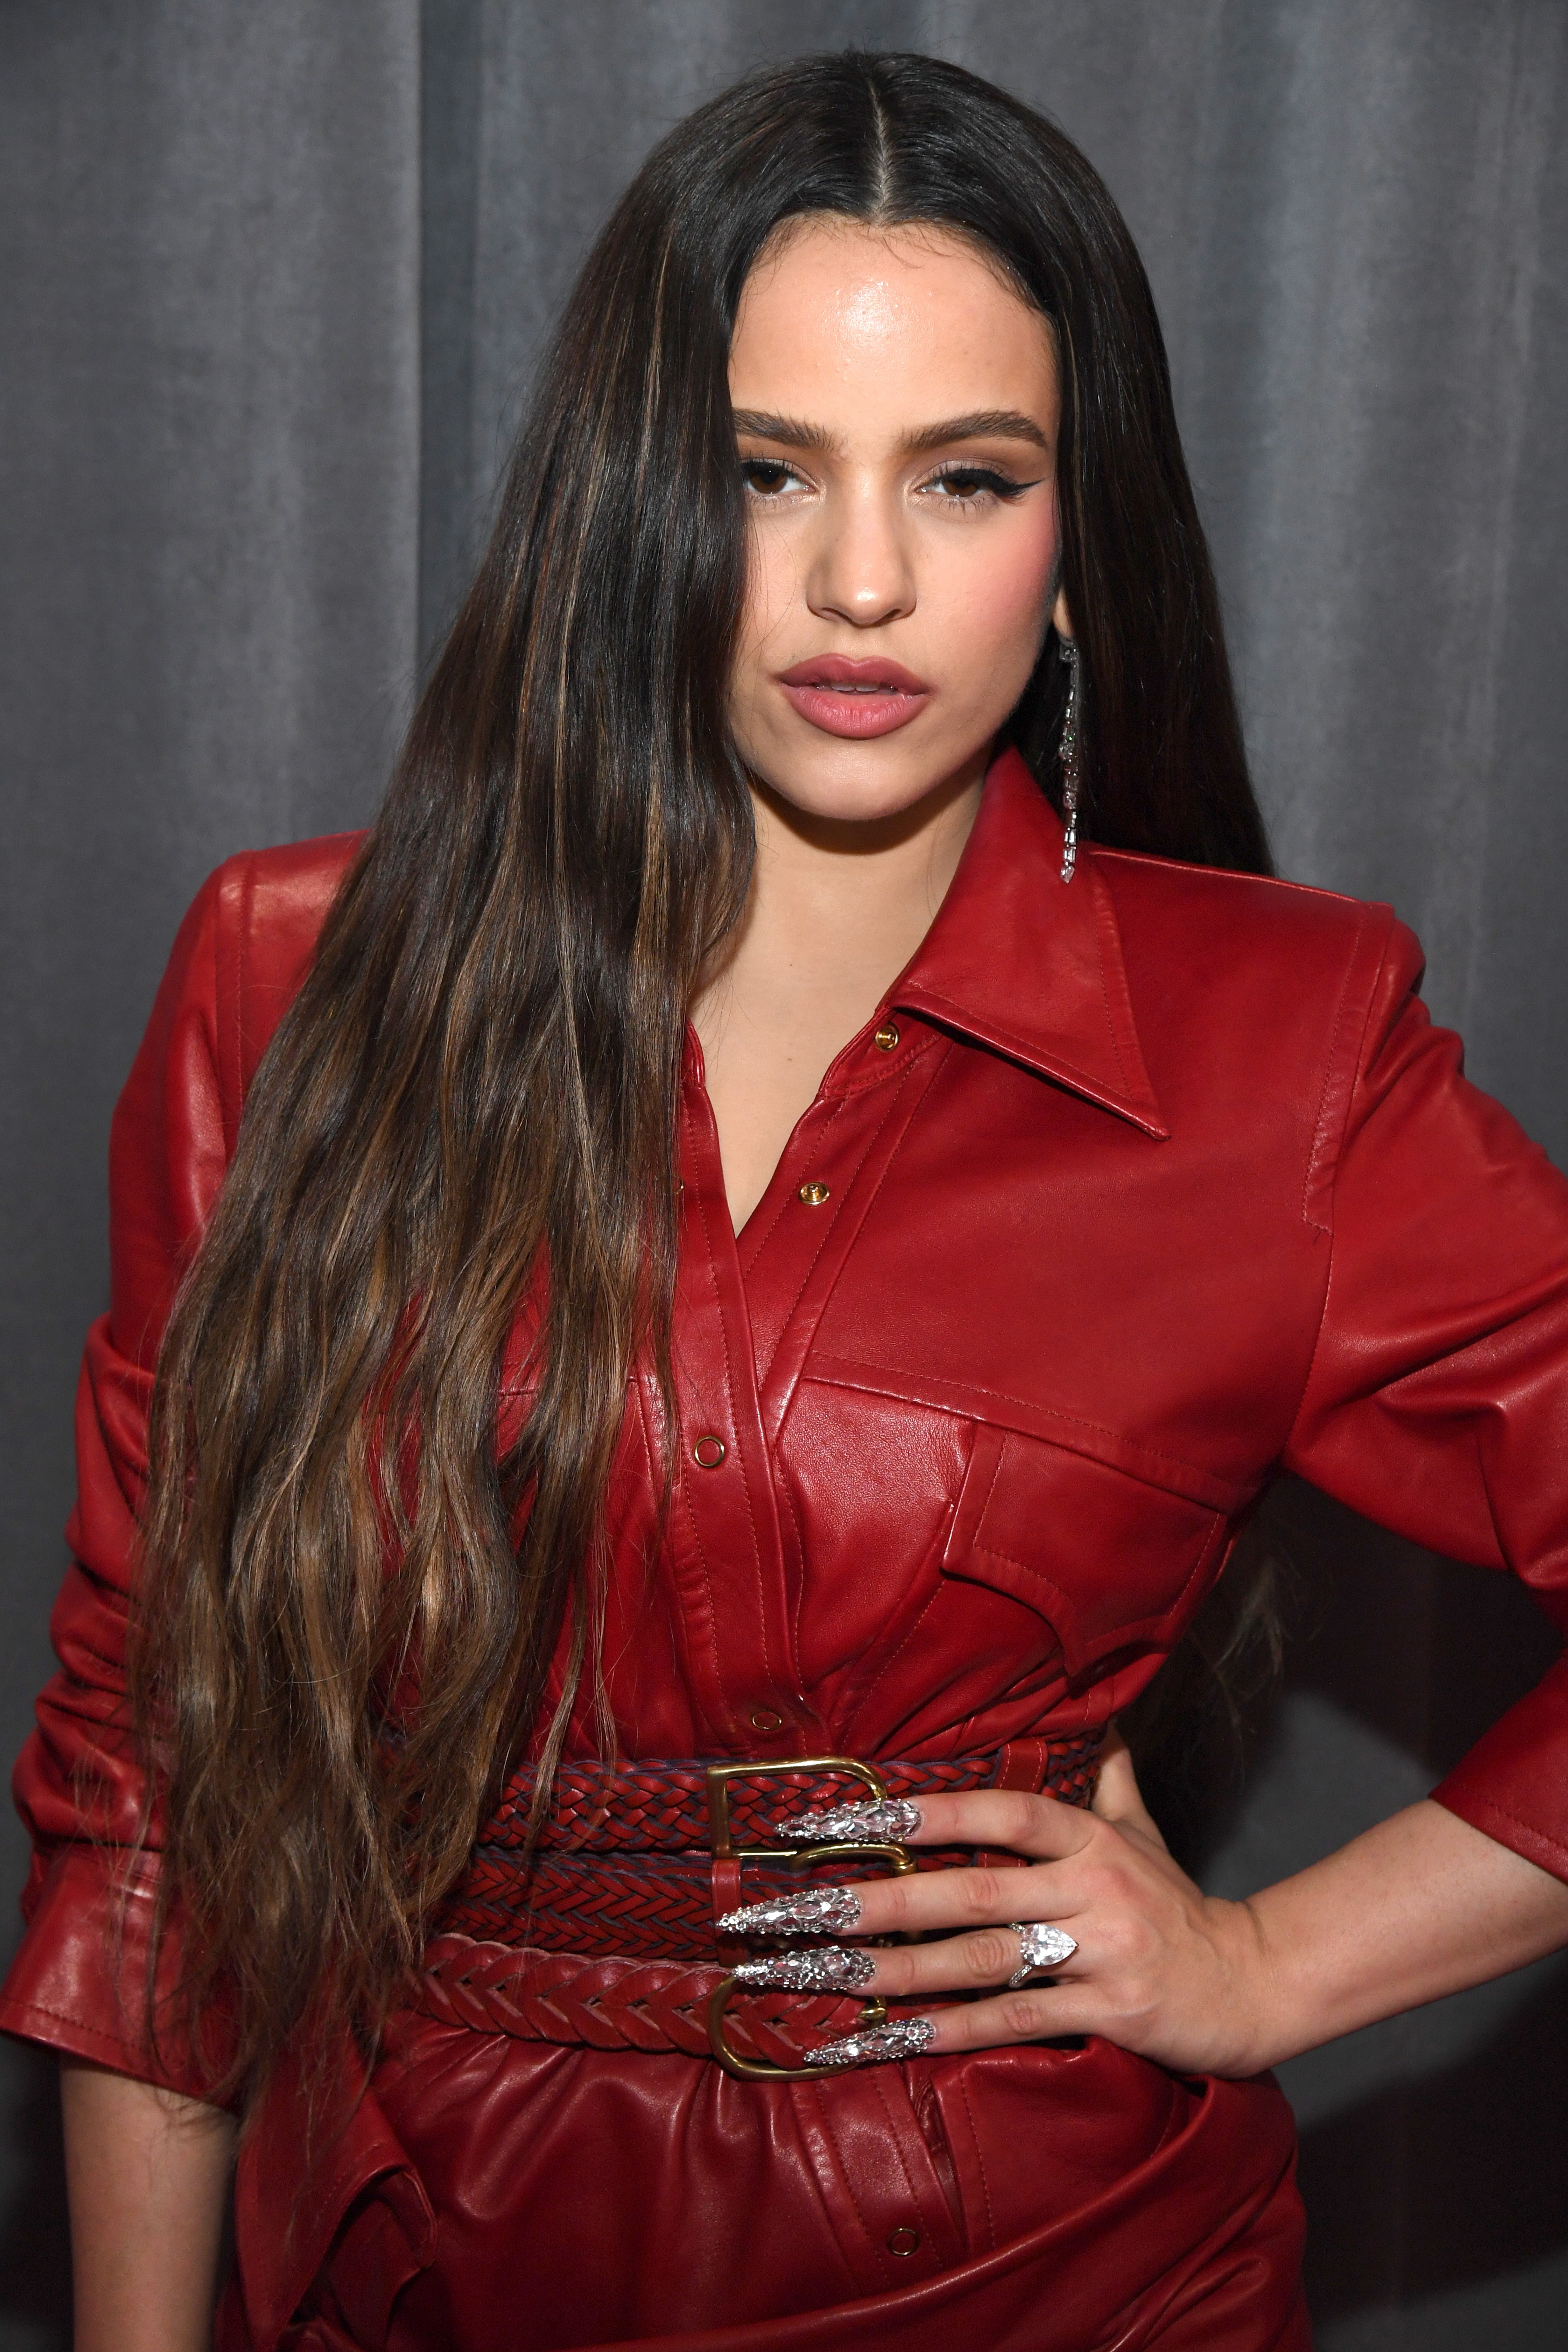 LOS ANGELES, CALIFORNIA - JANUARY 26: Rosalia attends the 62nd Annual GRAMMY Awards at STAPLES Center on January 26, 2020 in Los Angeles, California. (Photo by Kevin Mazur/Getty Images for The Recording Academy) (Foto: Getty Images for The Recording A)